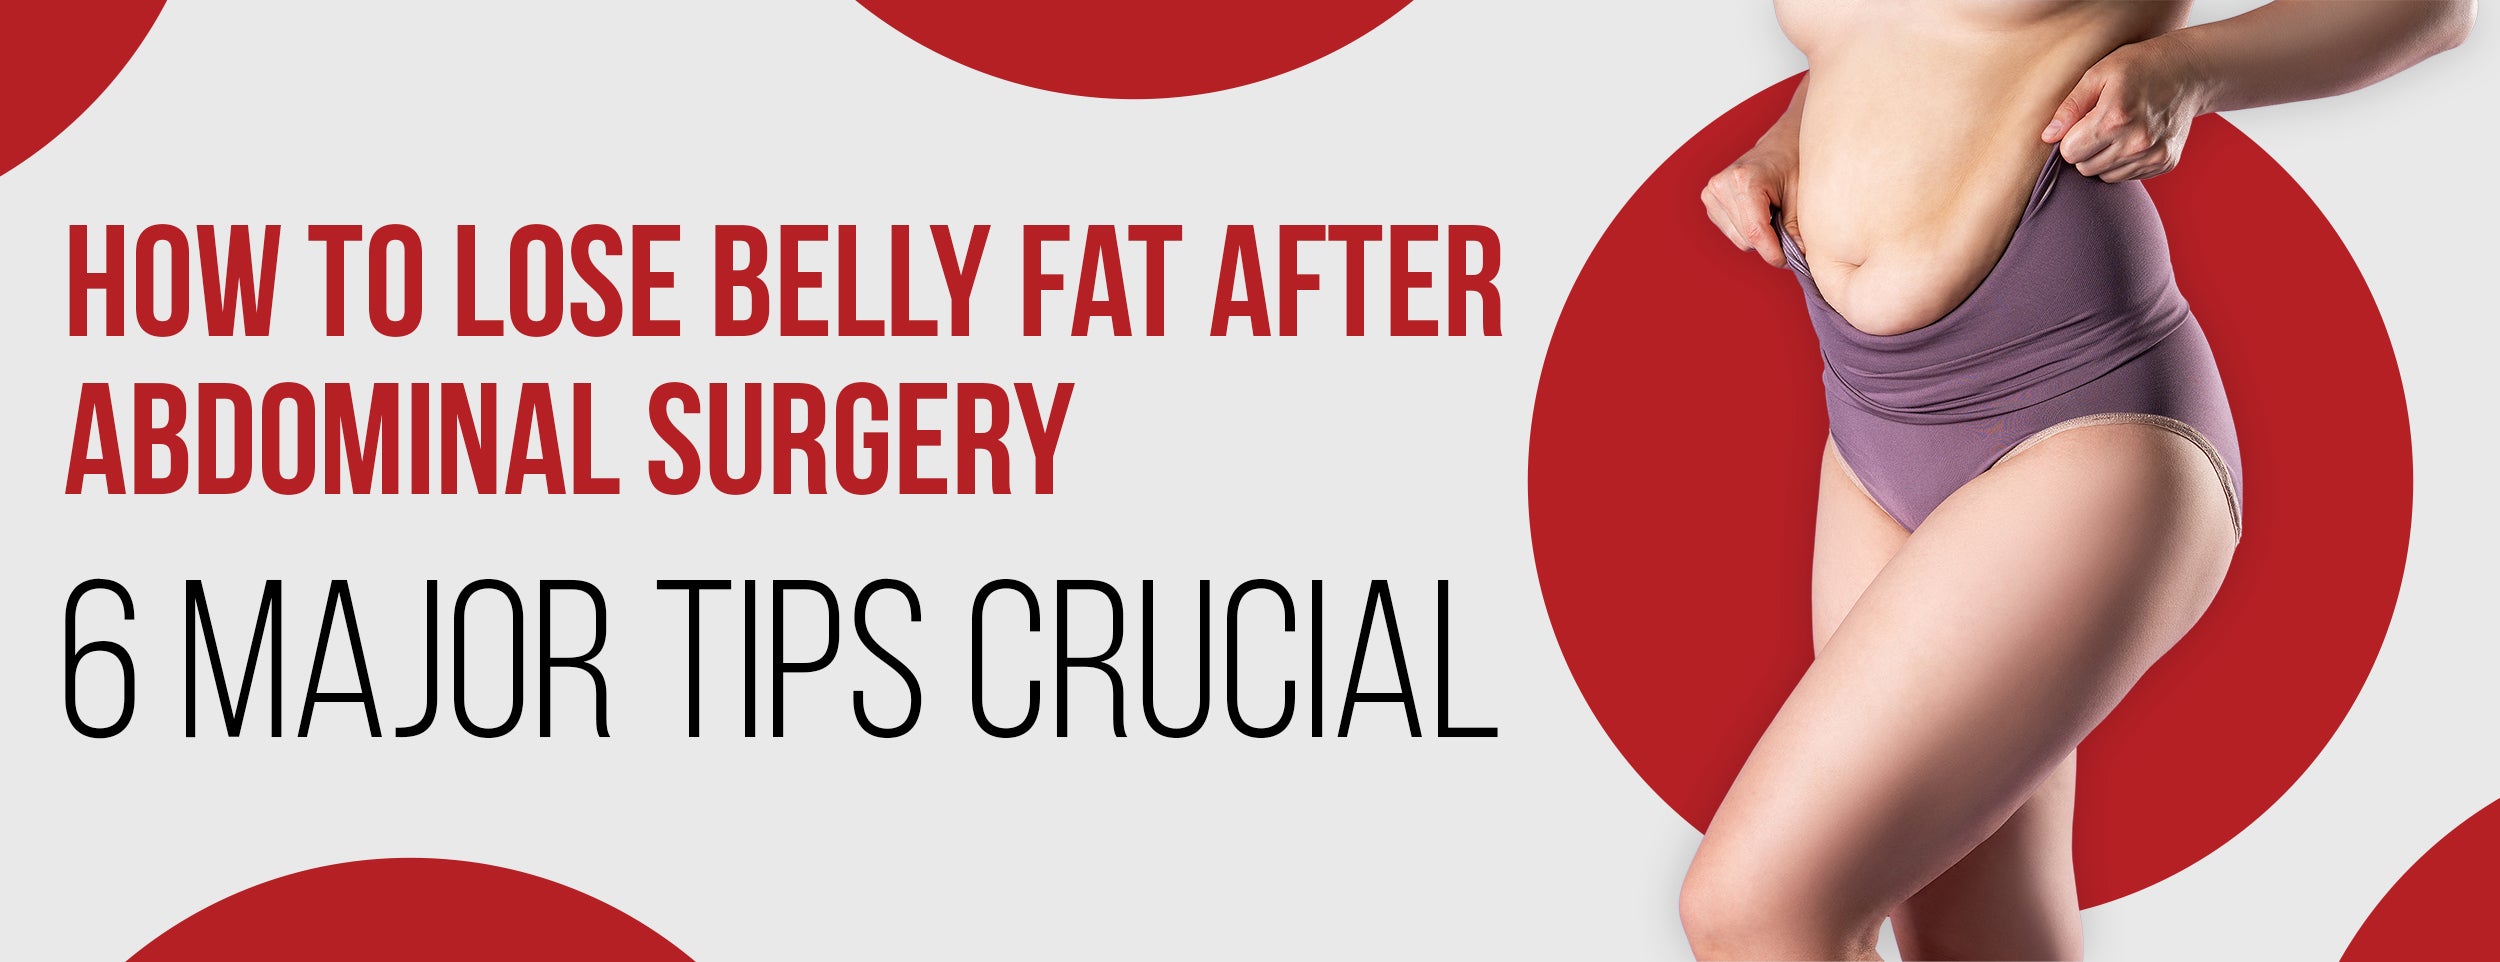 Tips on Losing Belly Fat After Abdominal Surgery